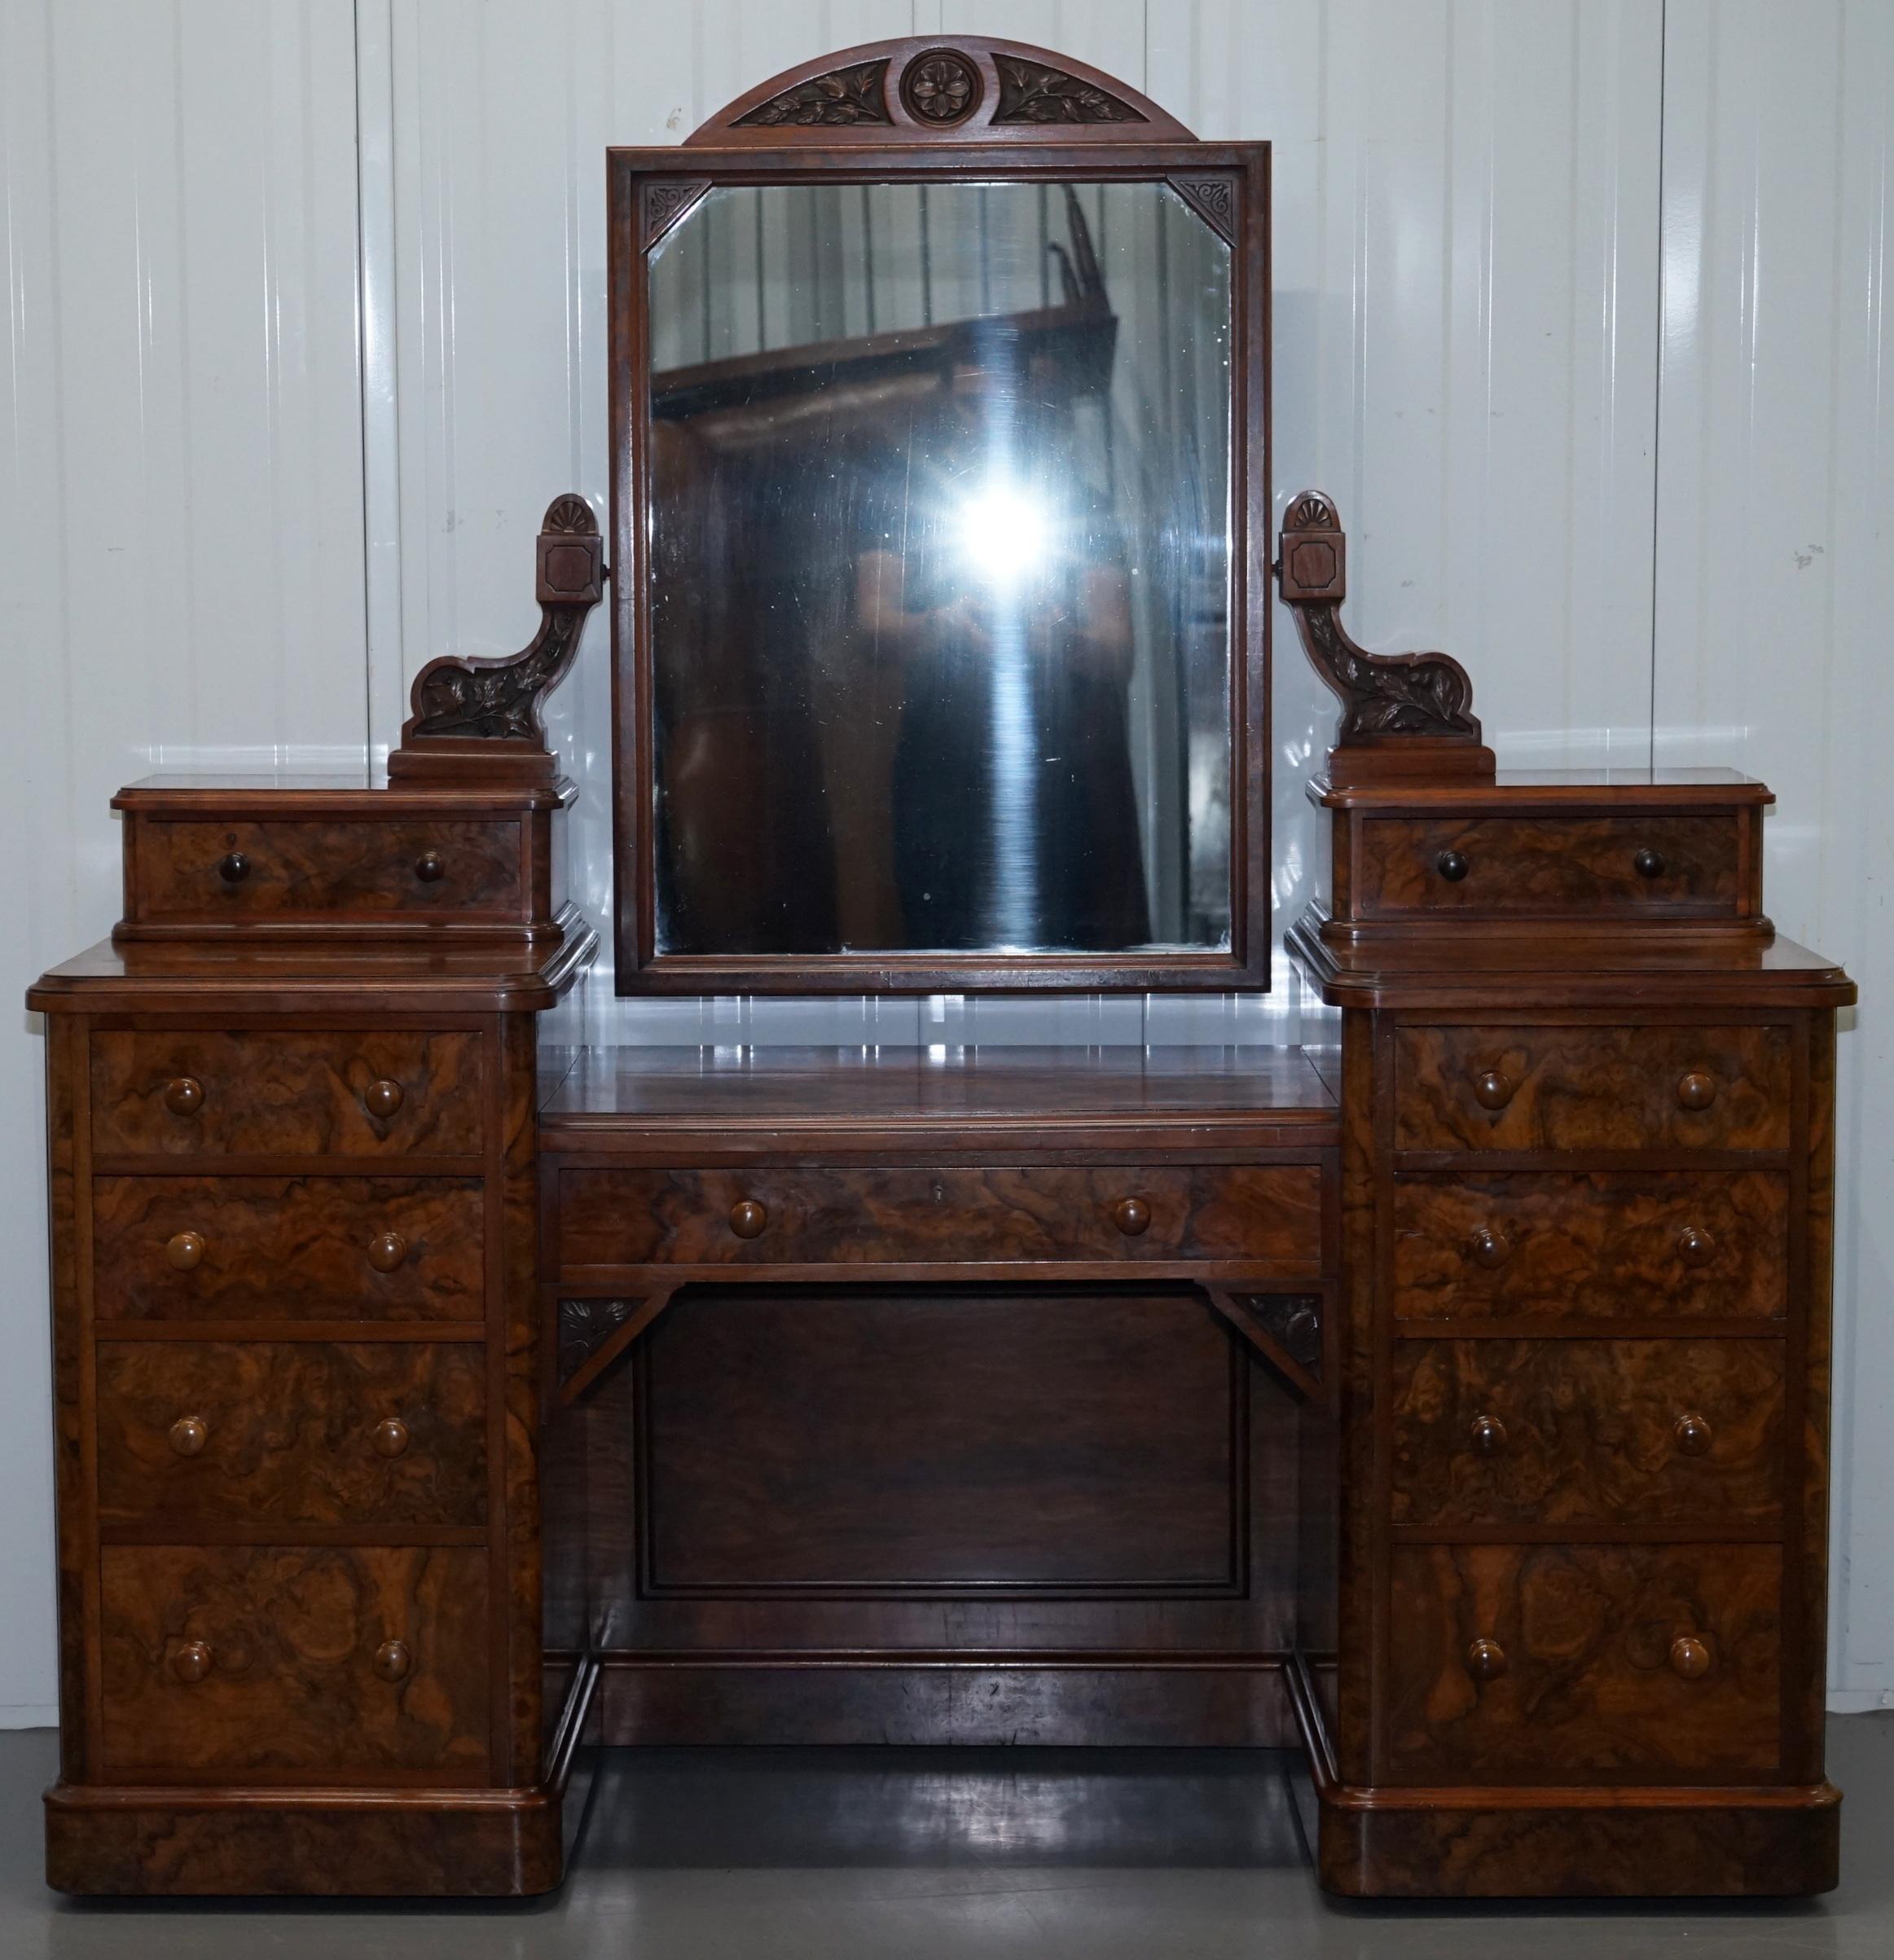 We are delighted to offer for sale this absolutely stunning circa 1890 Victorian burr walnut dressing table from the great company of Collinge’s Burnley

This is part of a suite, the full set includes a stunning dressing table, pair of side table